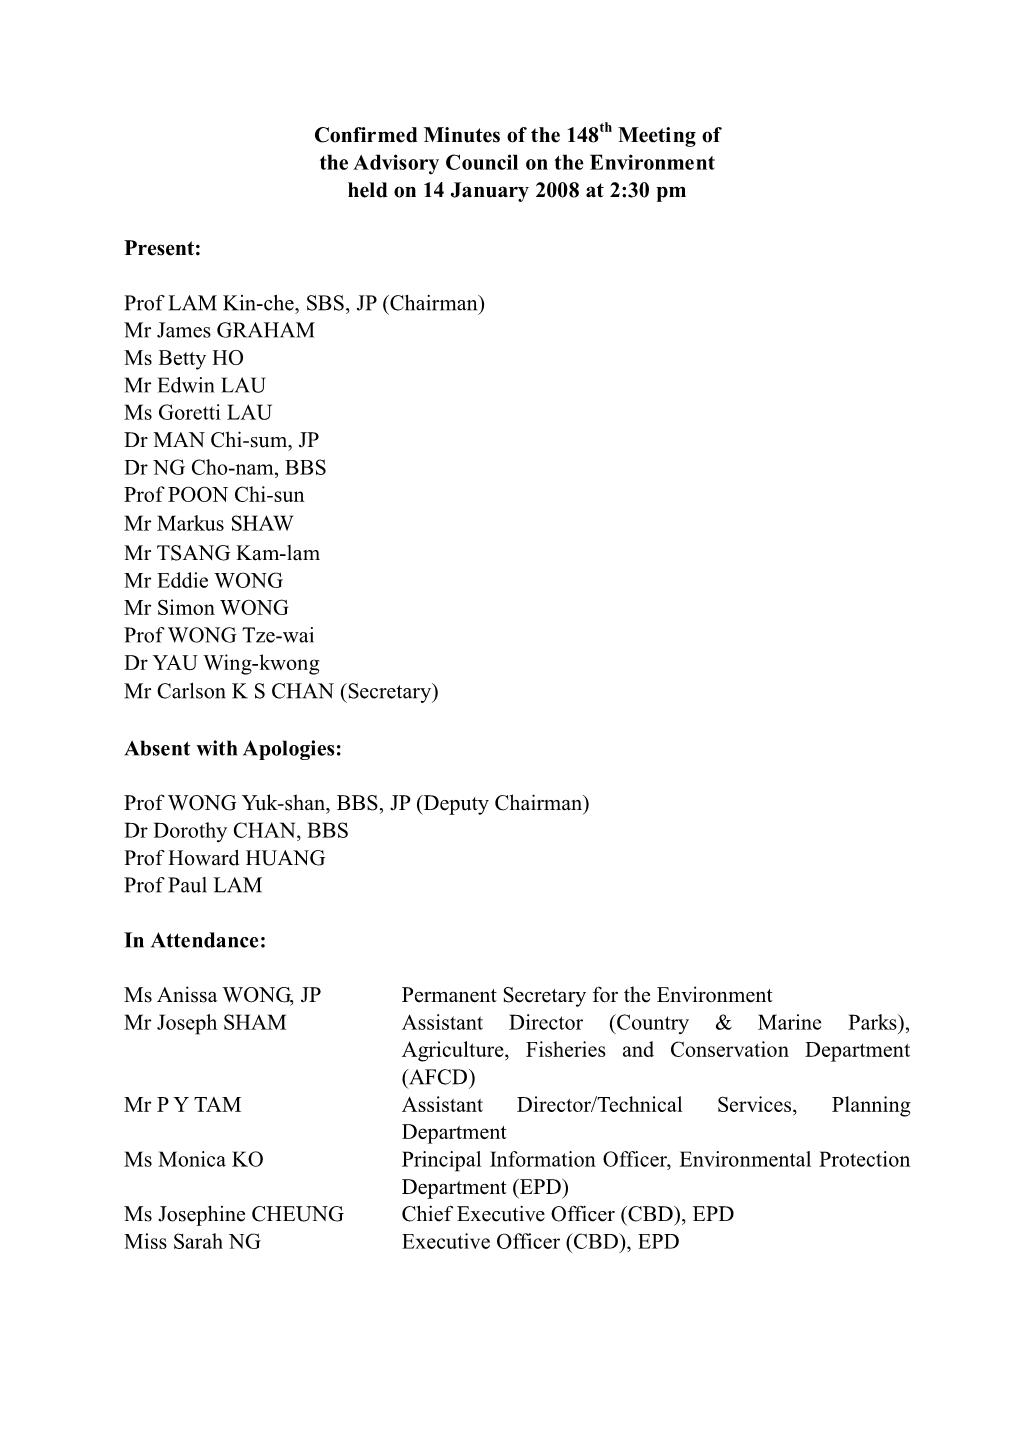 Confirmed Minutes of the 148Th Meeting of the Advisory Council on the Environment Held on 14 January 2008 at 2:30 Pm